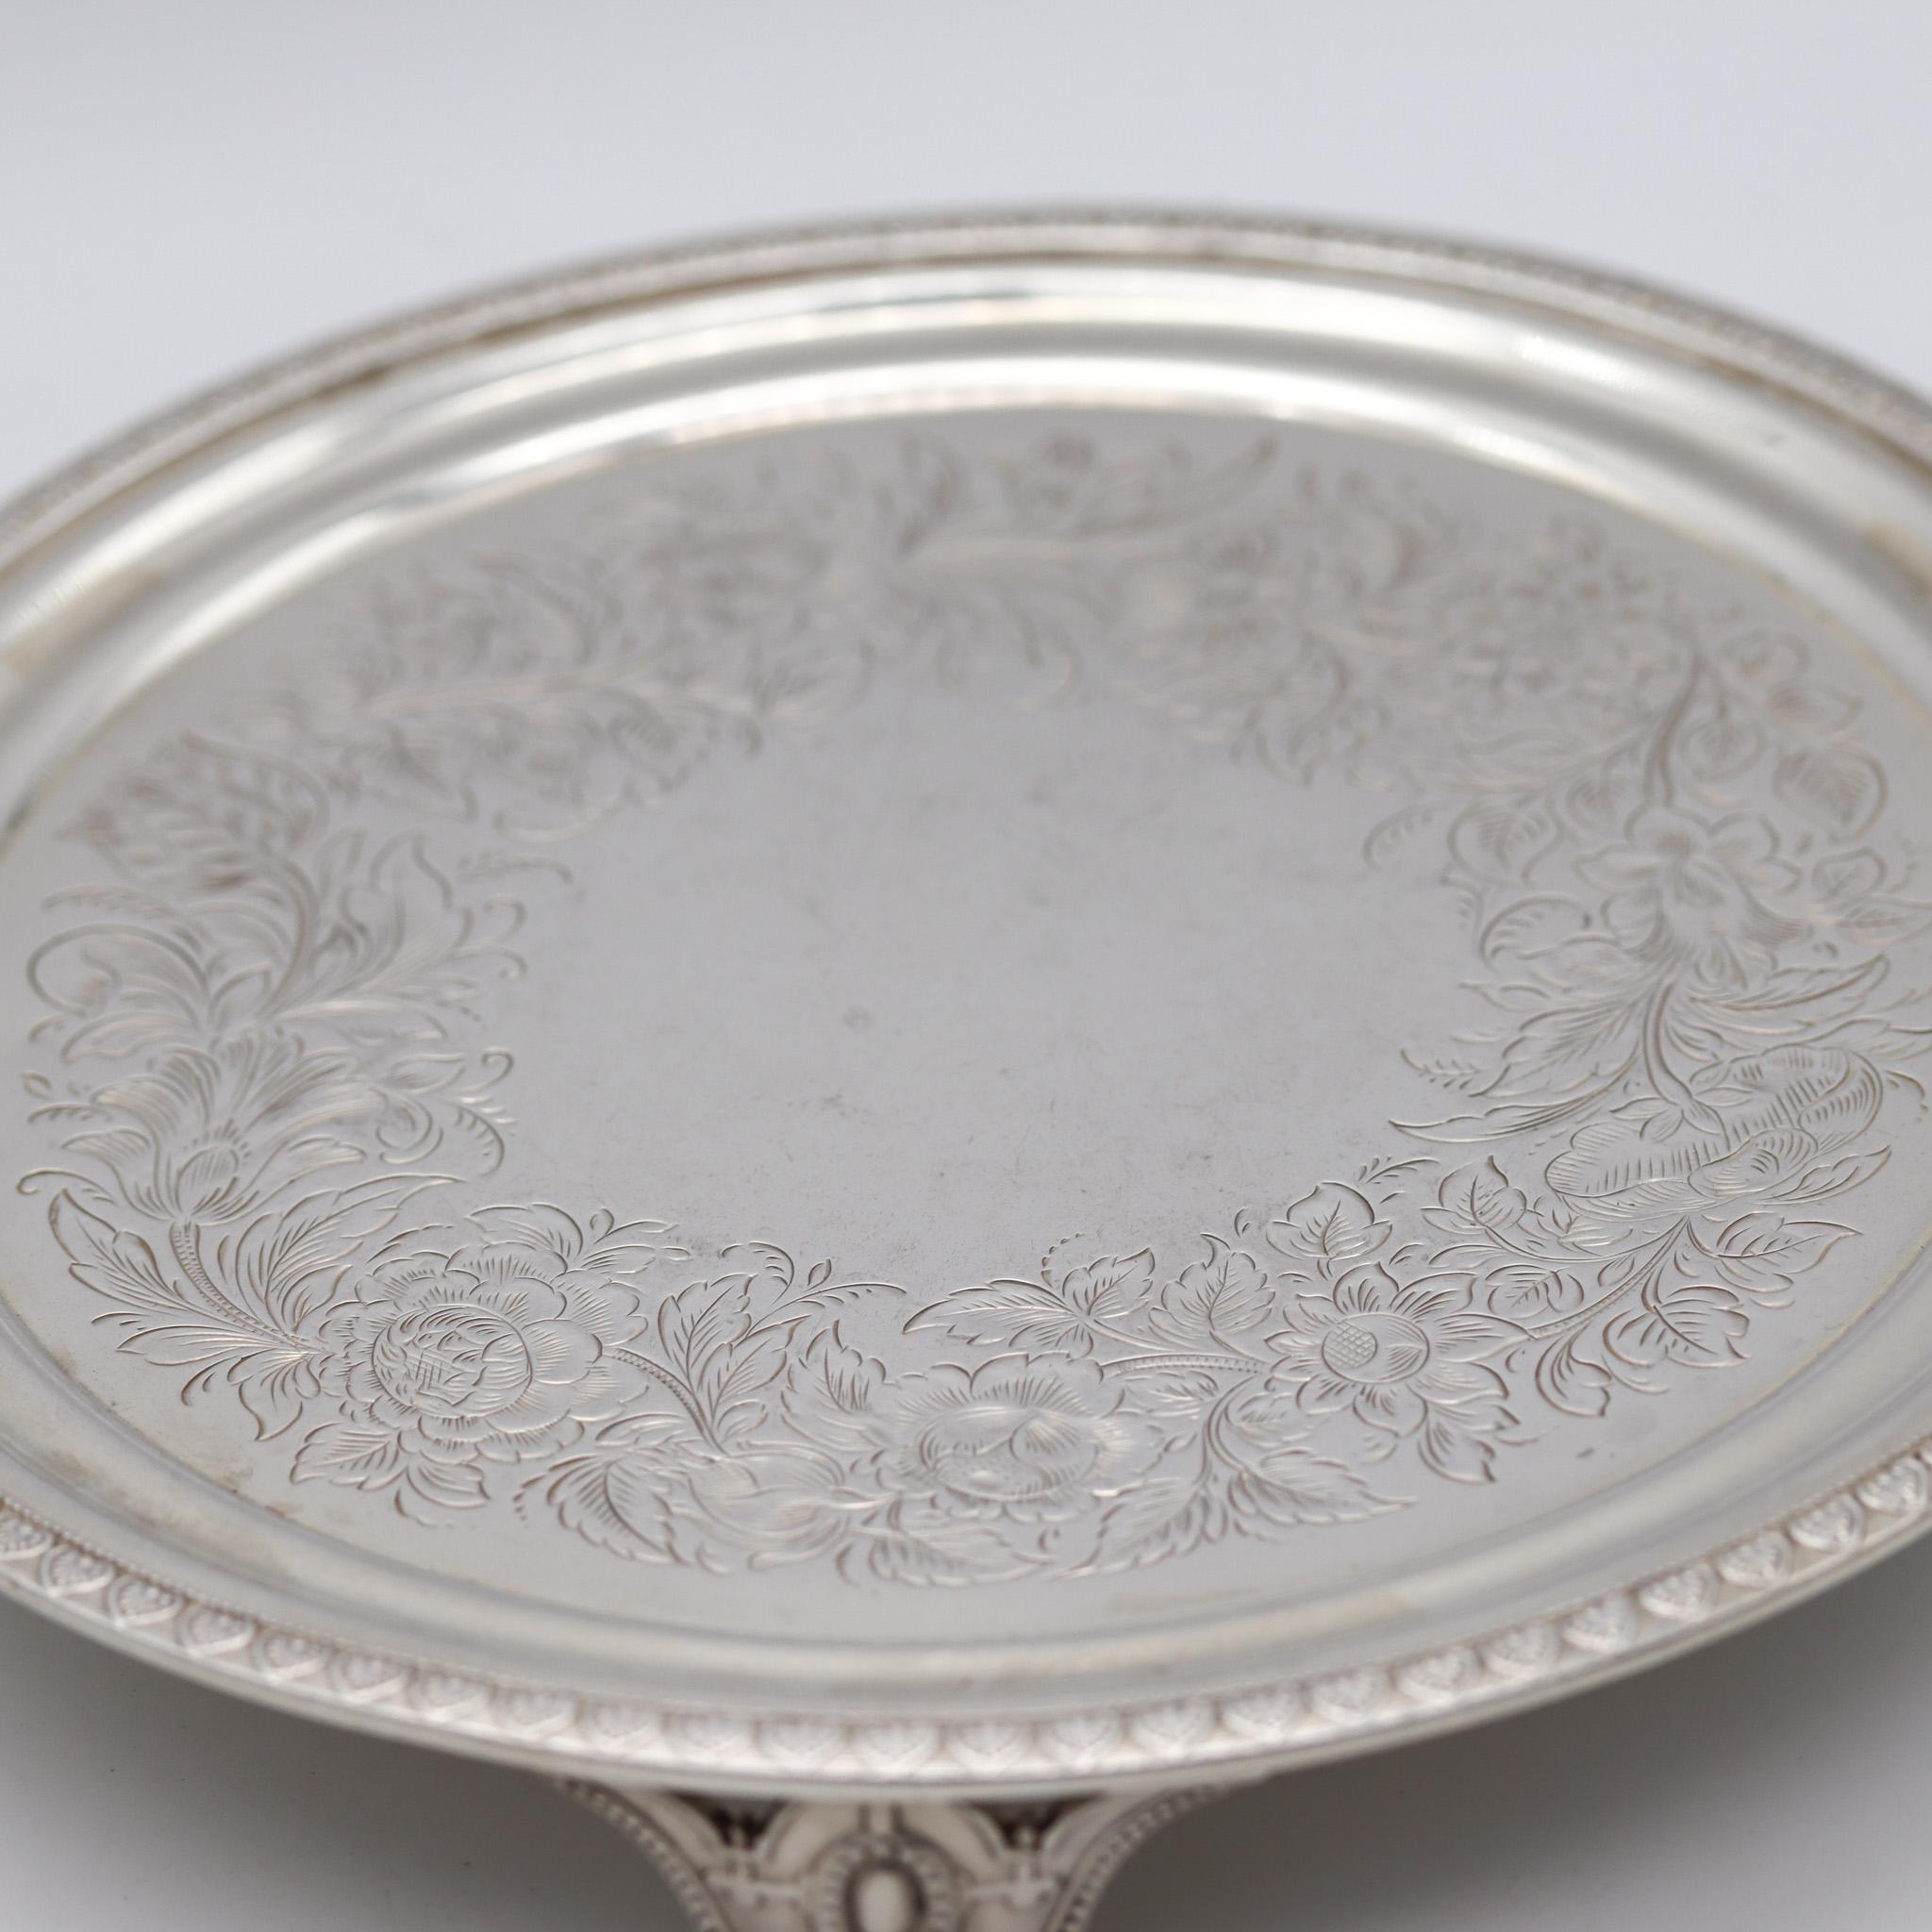 American Tiffany & Co. 1858 New York Round Display Tray In Solid .925 Sterling Silver For Sale